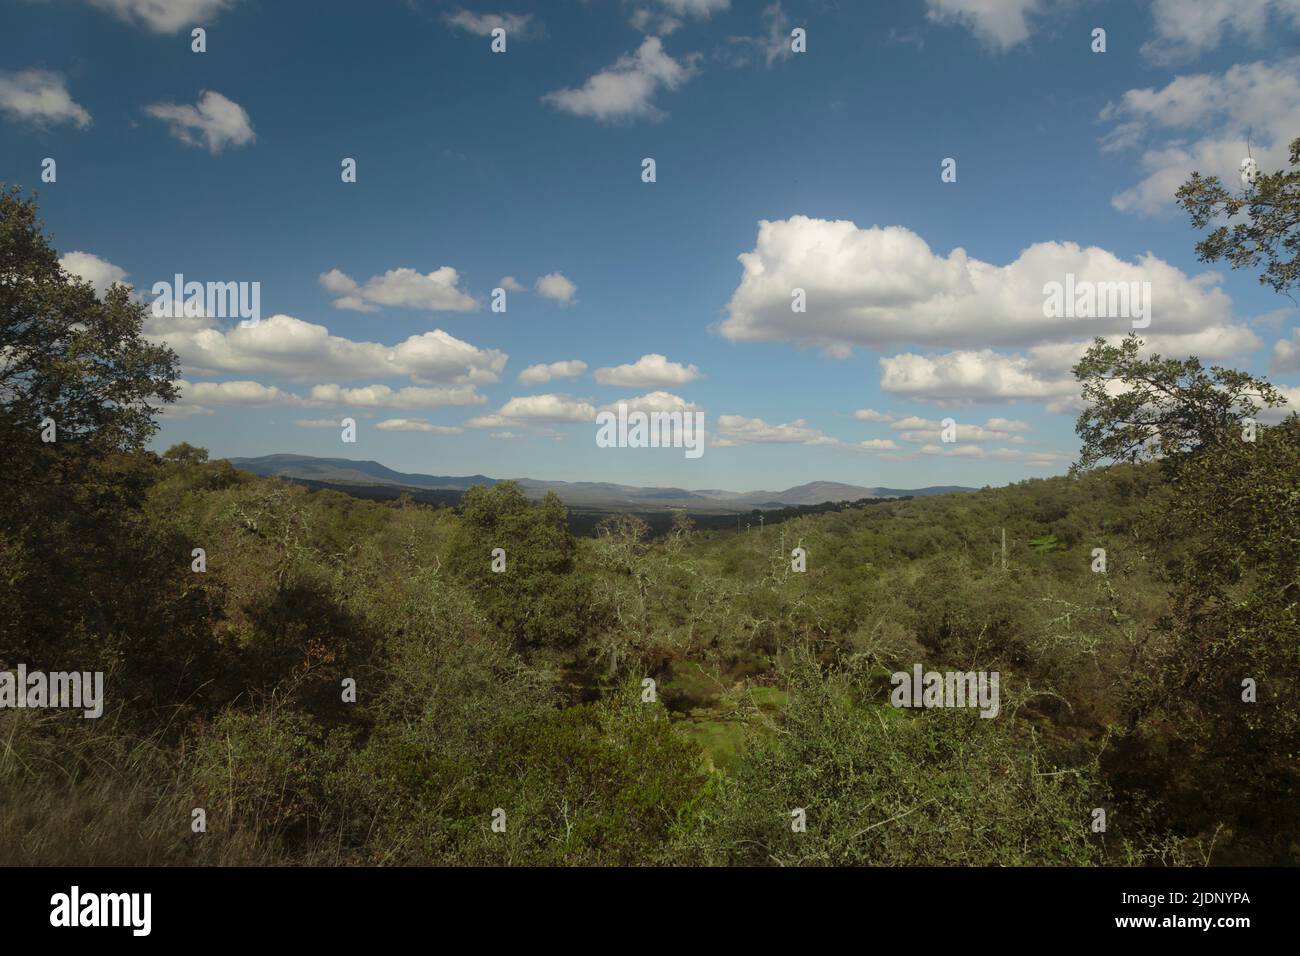 Spanish woodland landscape bathed in the sunglight Stock Photo